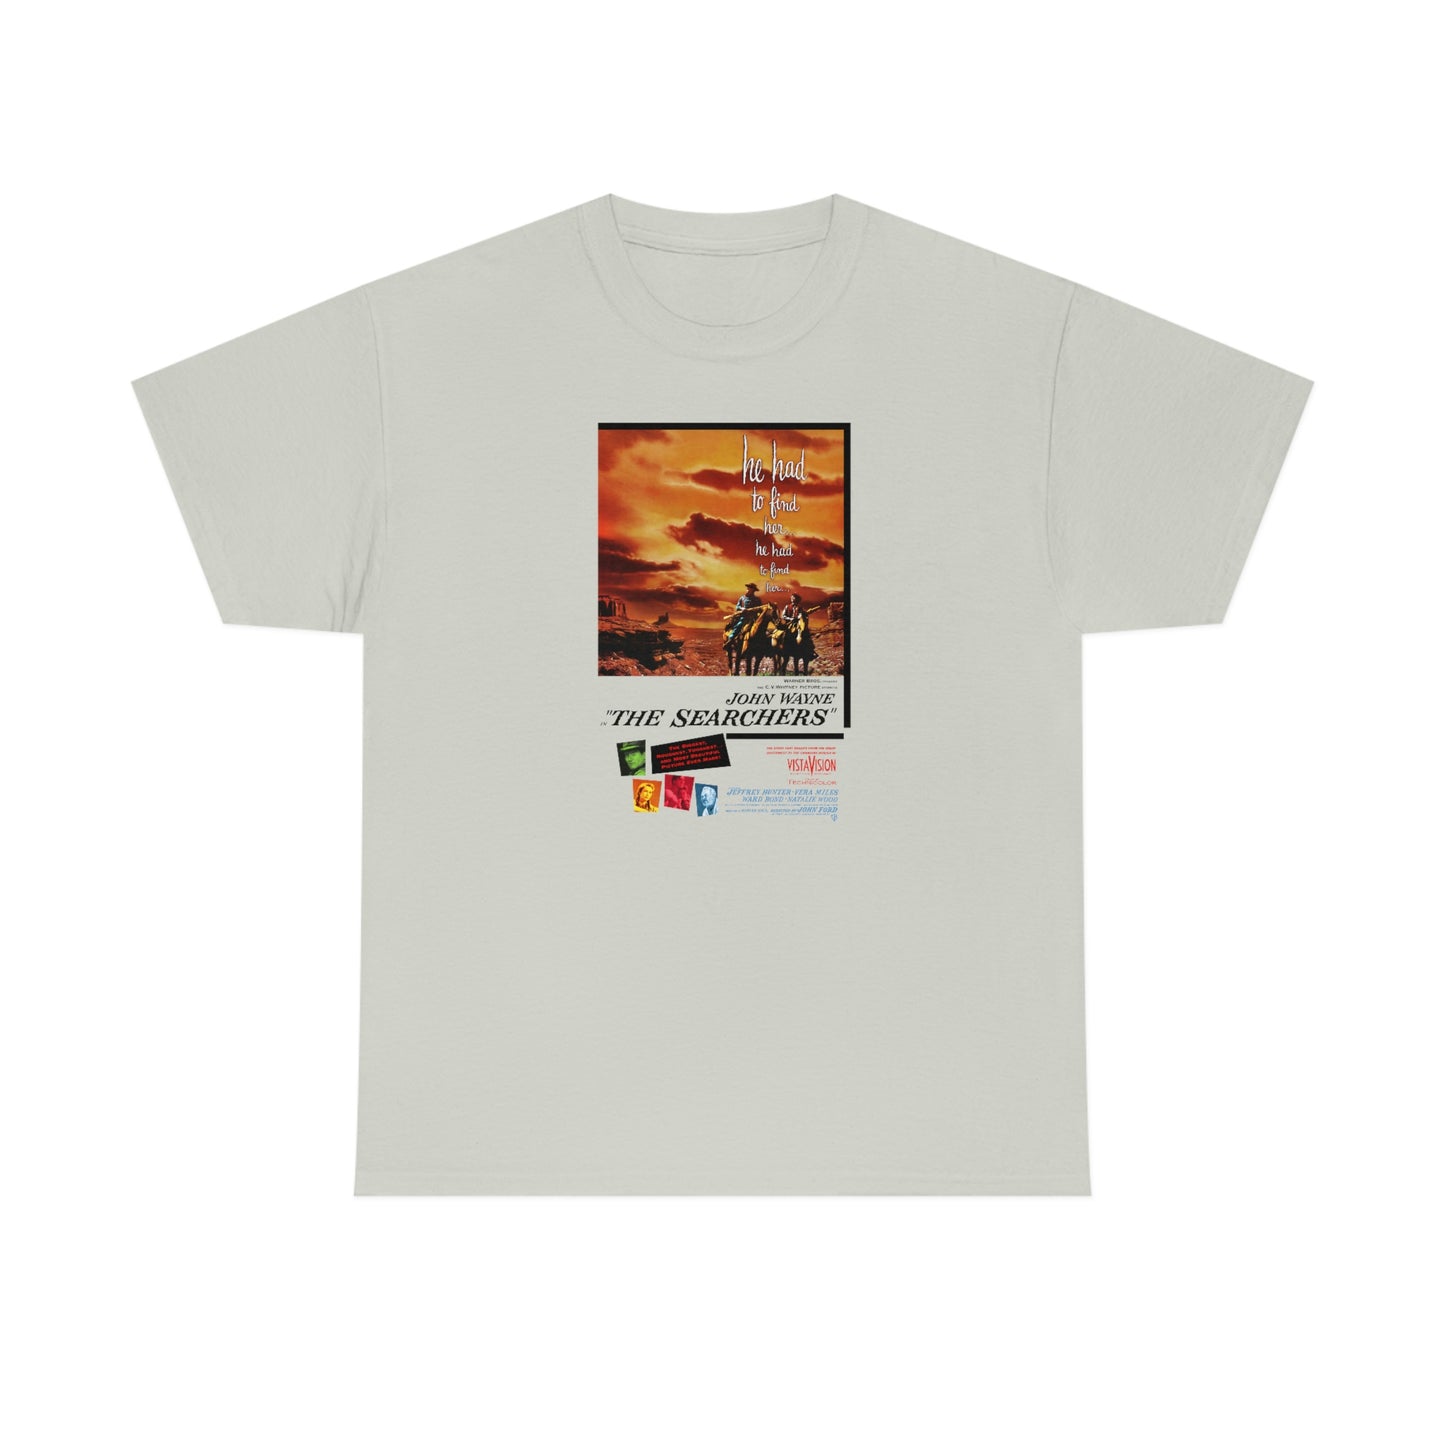 The Searchers T-Shirt